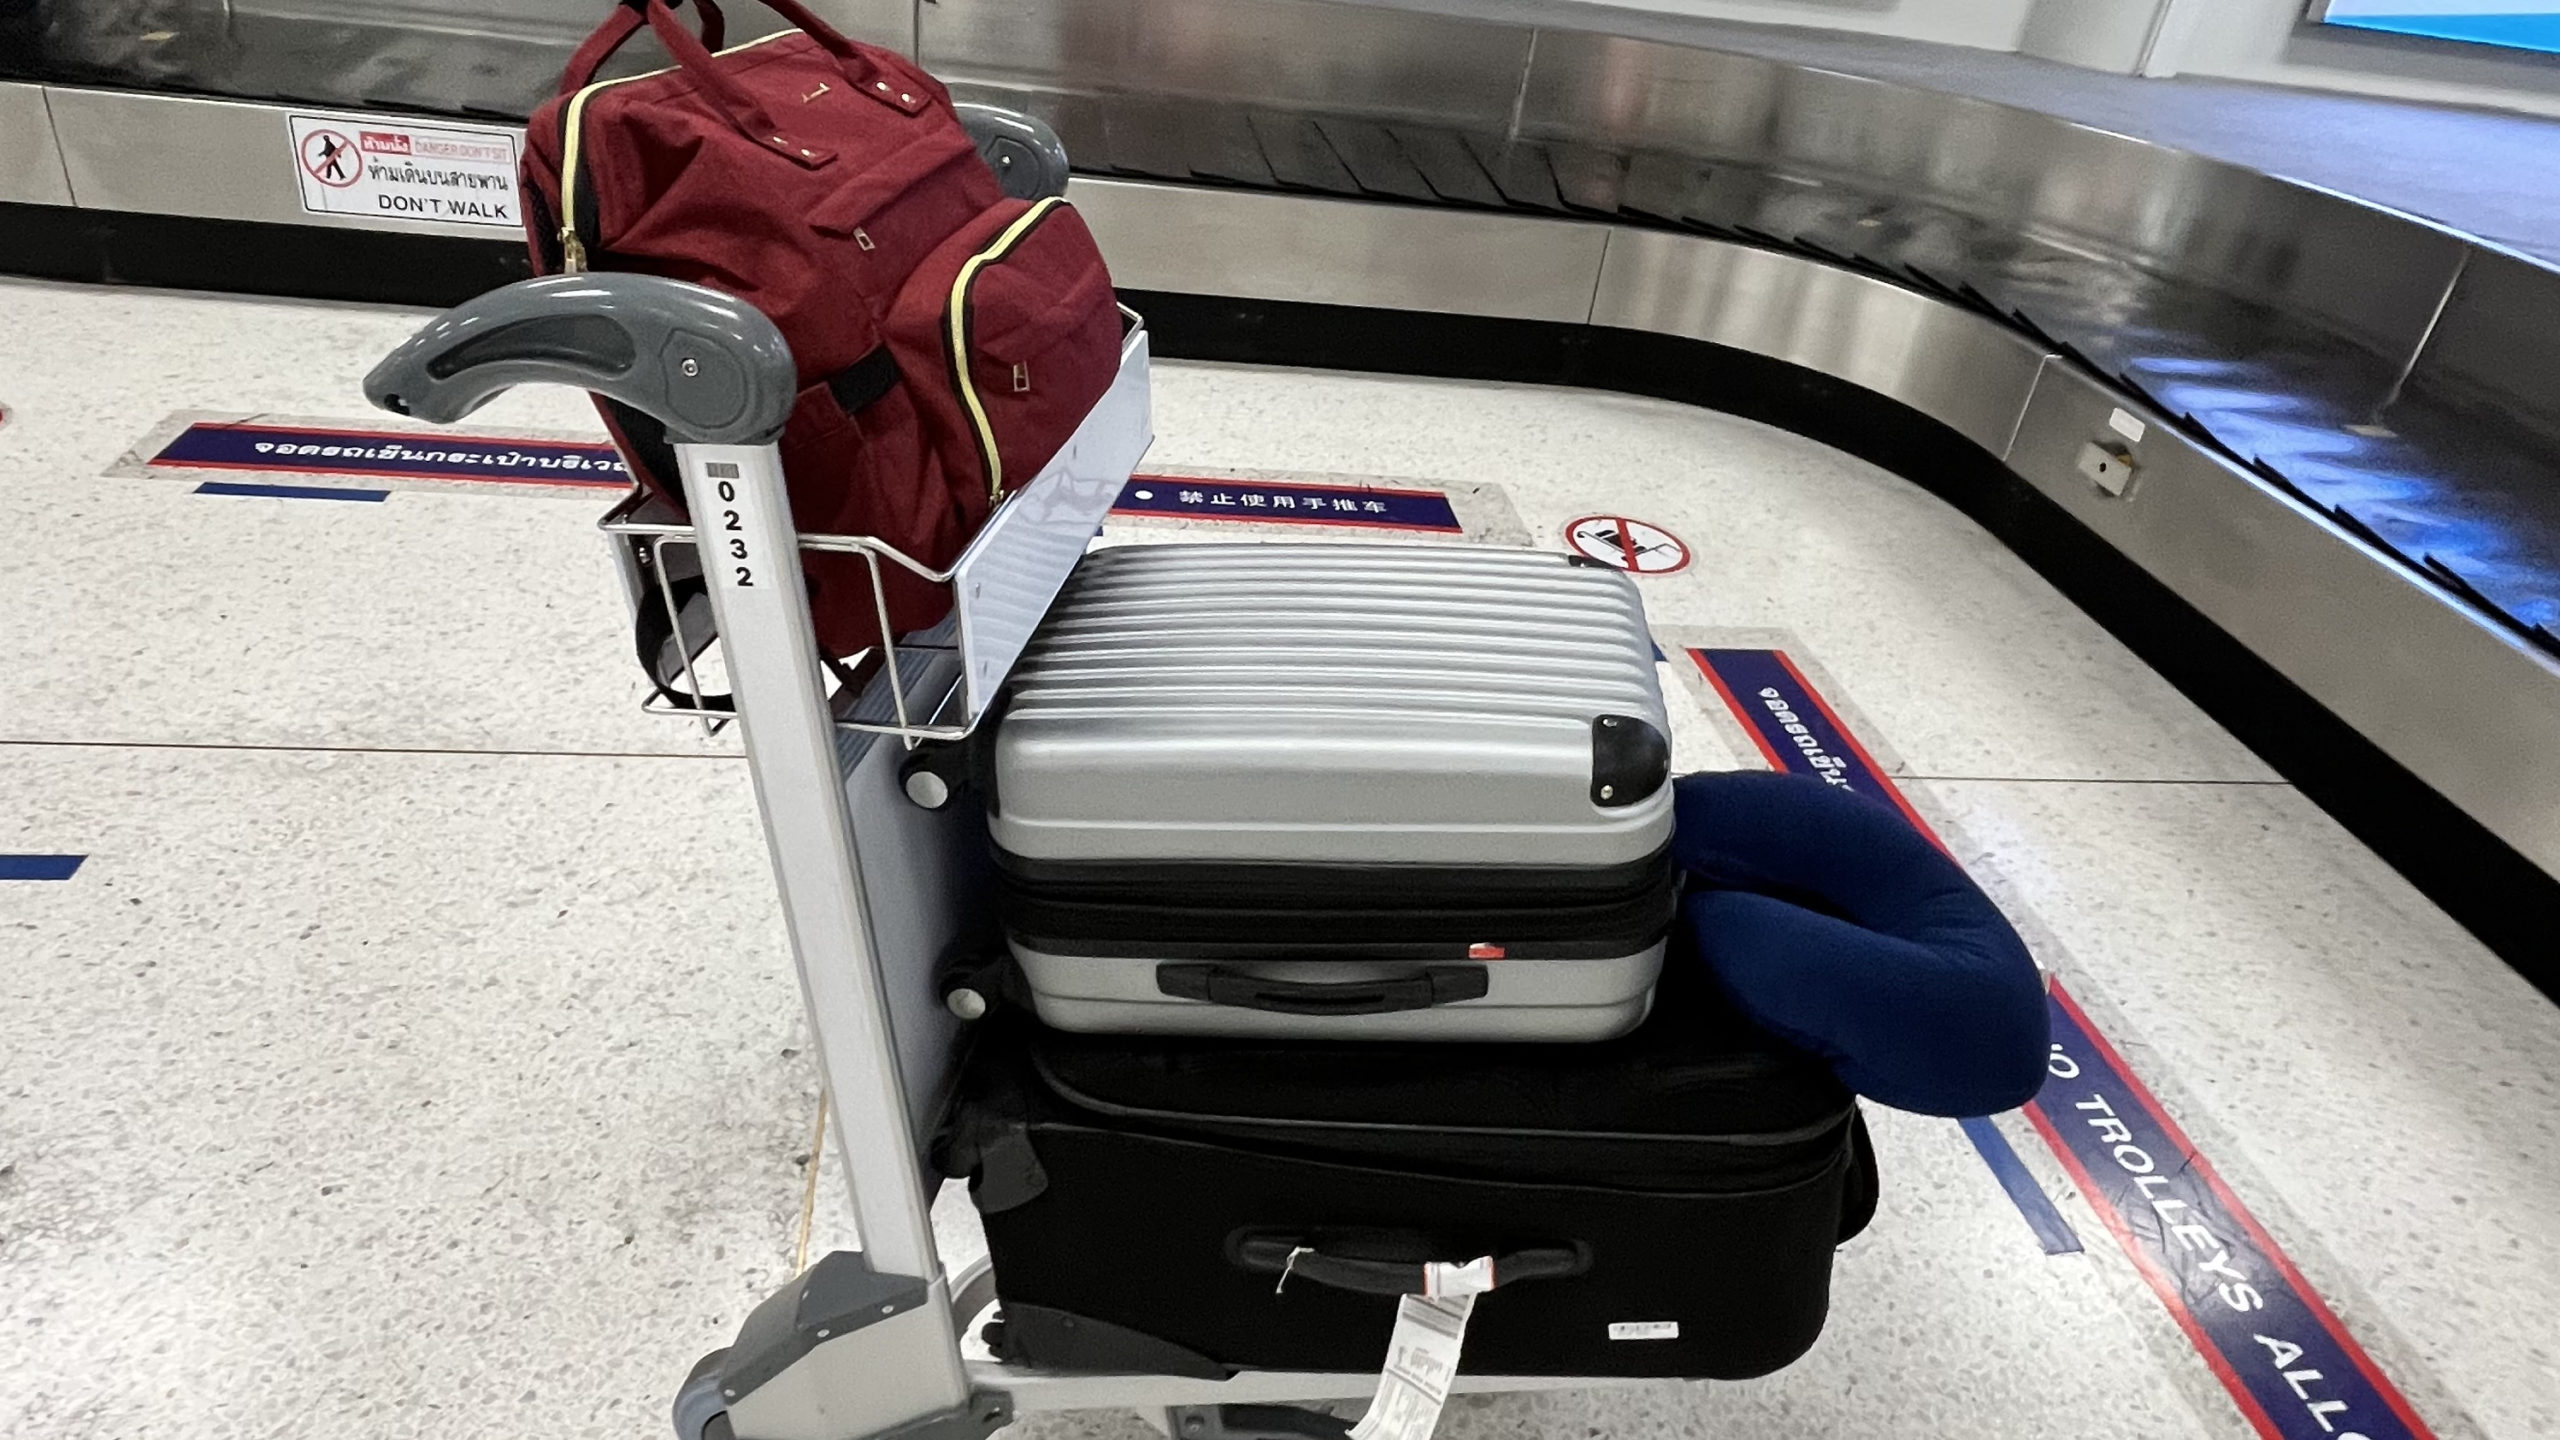 Luggage at airport